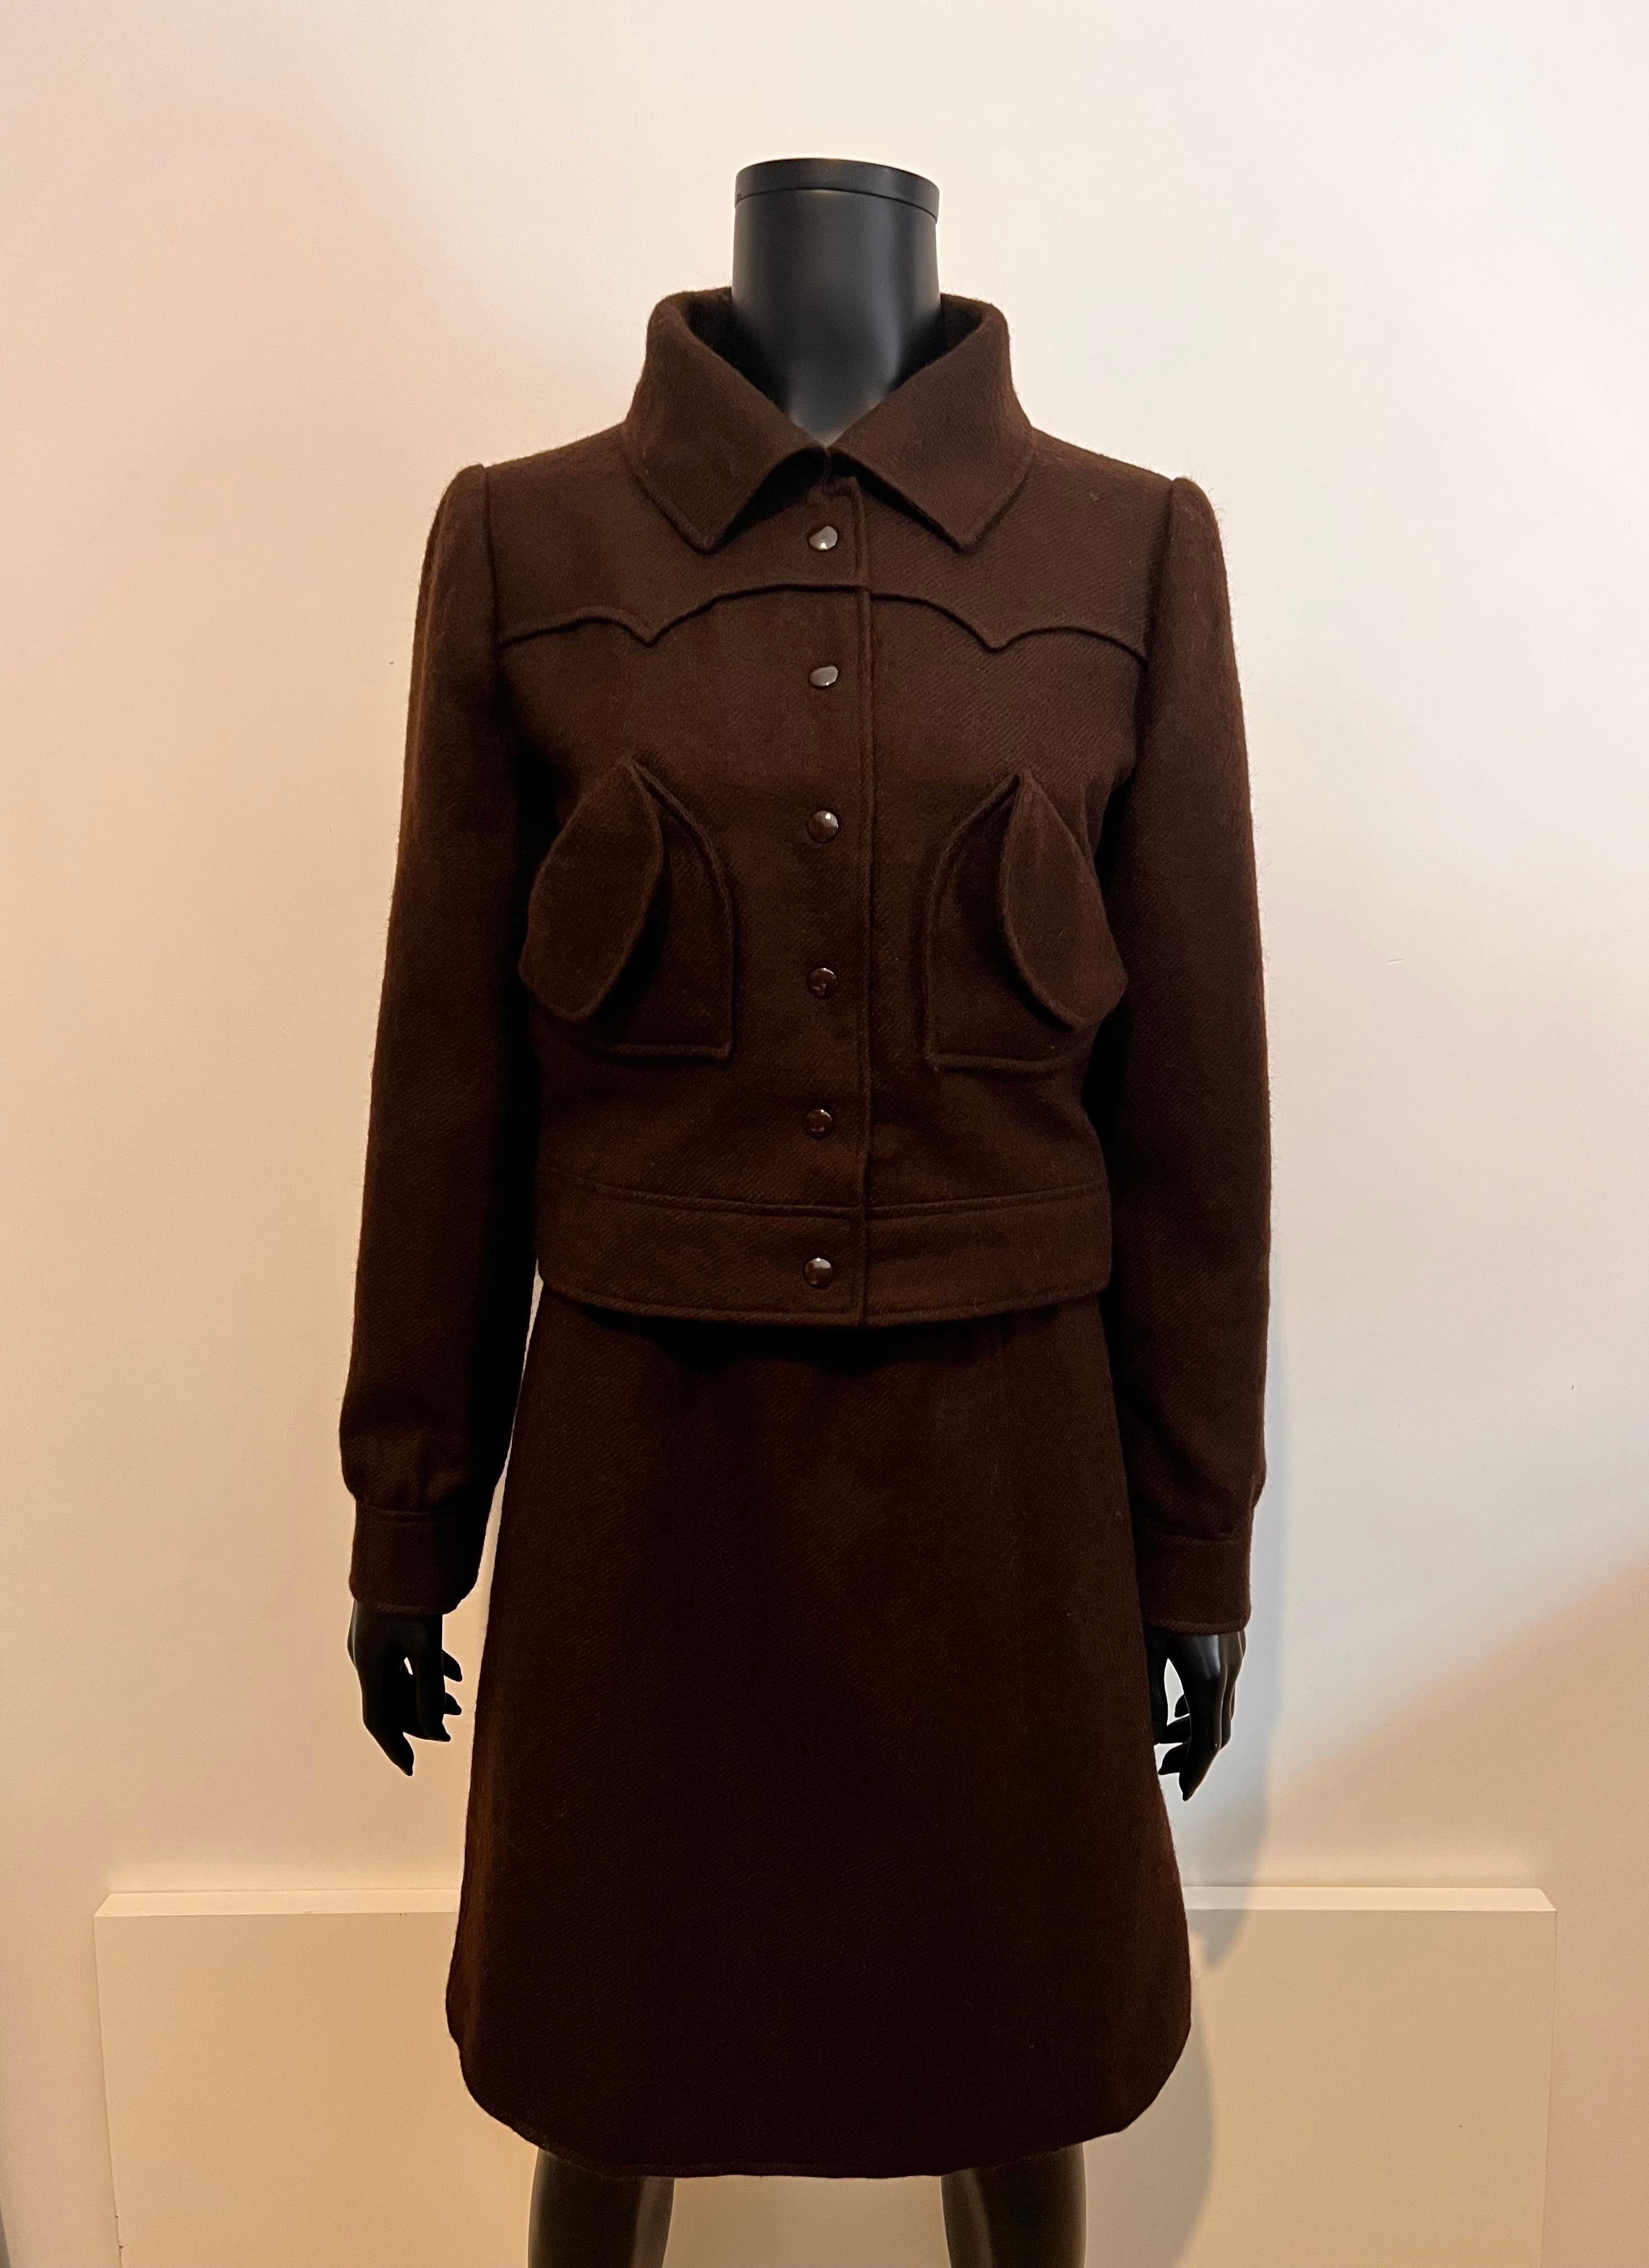 A chic and unique 1970s Courrèges Hyperbole wool suit/jacket & skirt set in deep chocolate

Curved pockets make an almost heart shape with top stitch and sharp cut collar with press stud fastening detail, also on sleeve cuff.

Unique yoke shape to